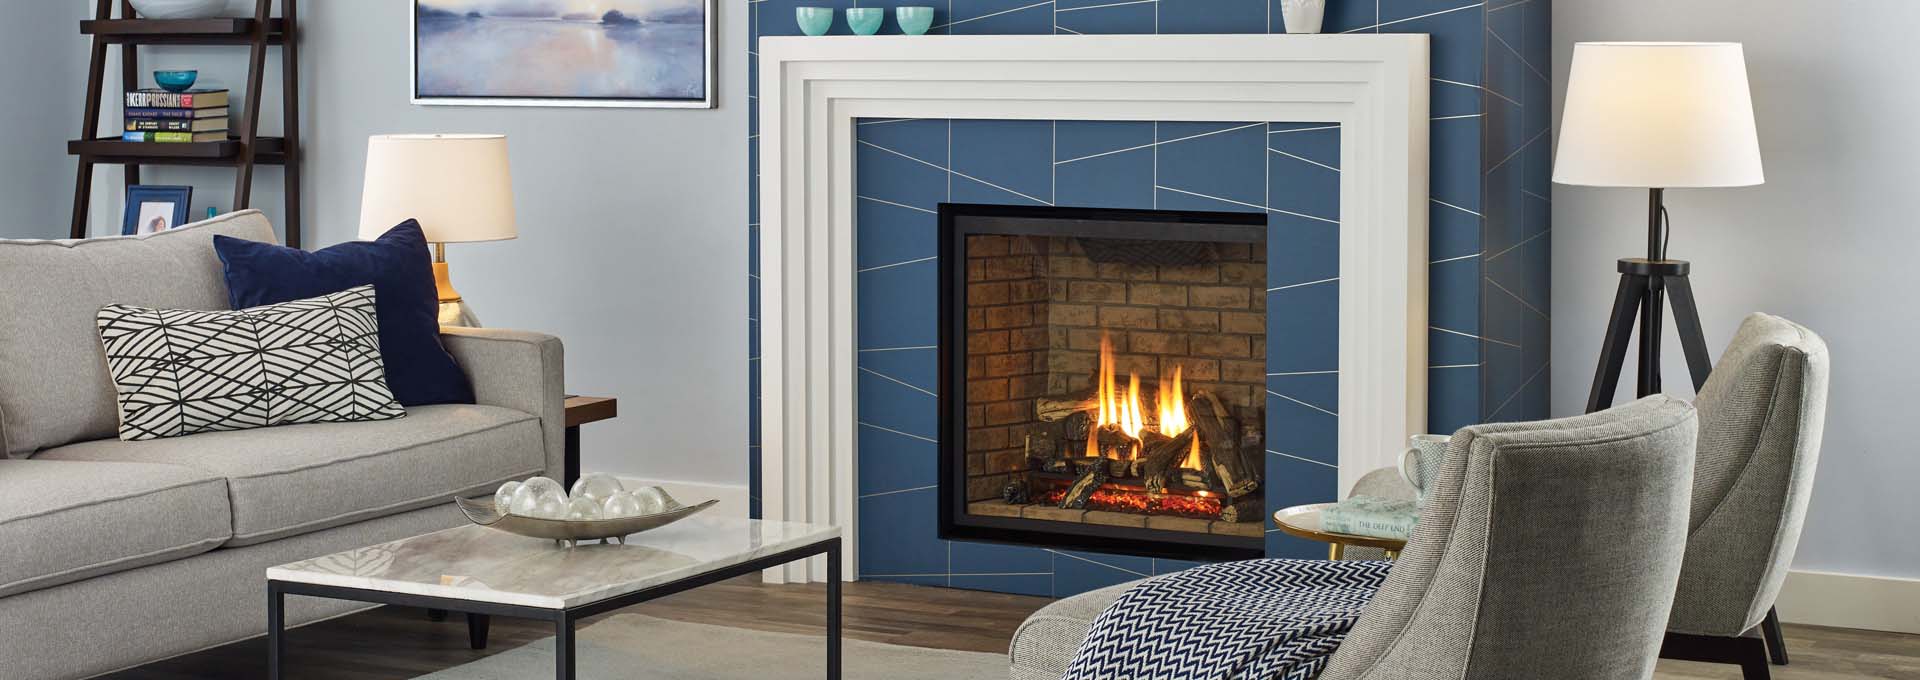 G800 Large Traditional Gas Fireplace from Regency